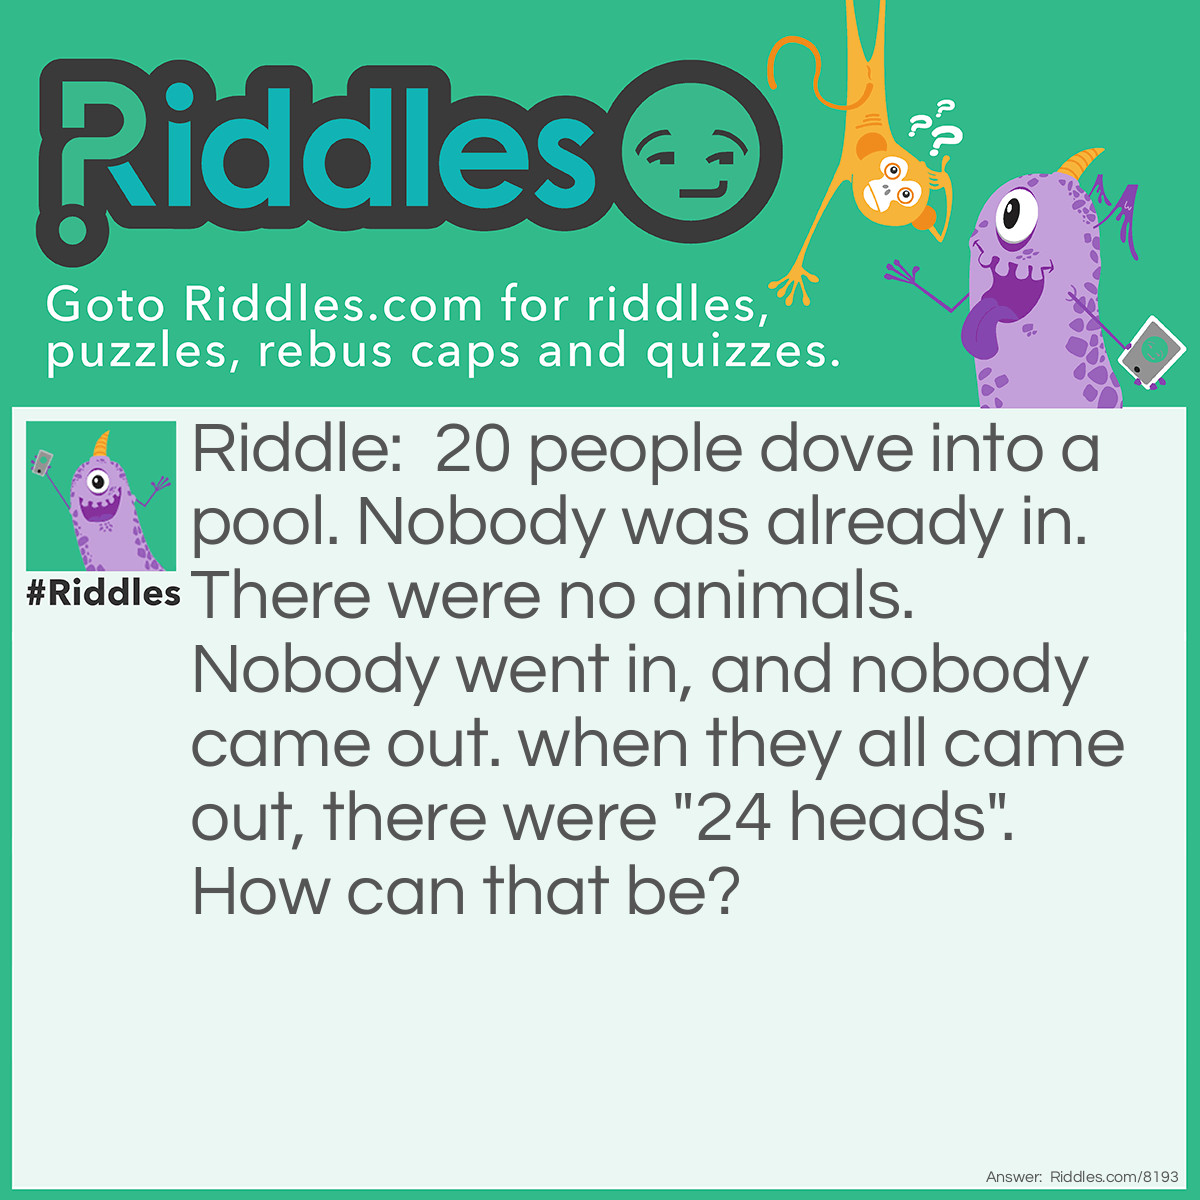 Riddle: 20 people dove into a pool. Nobody was already in. There were no animals. Nobody went in, and nobody came out. when they all came out, there were "24 heads". How can that be? Answer: There were 20 FORE heads!